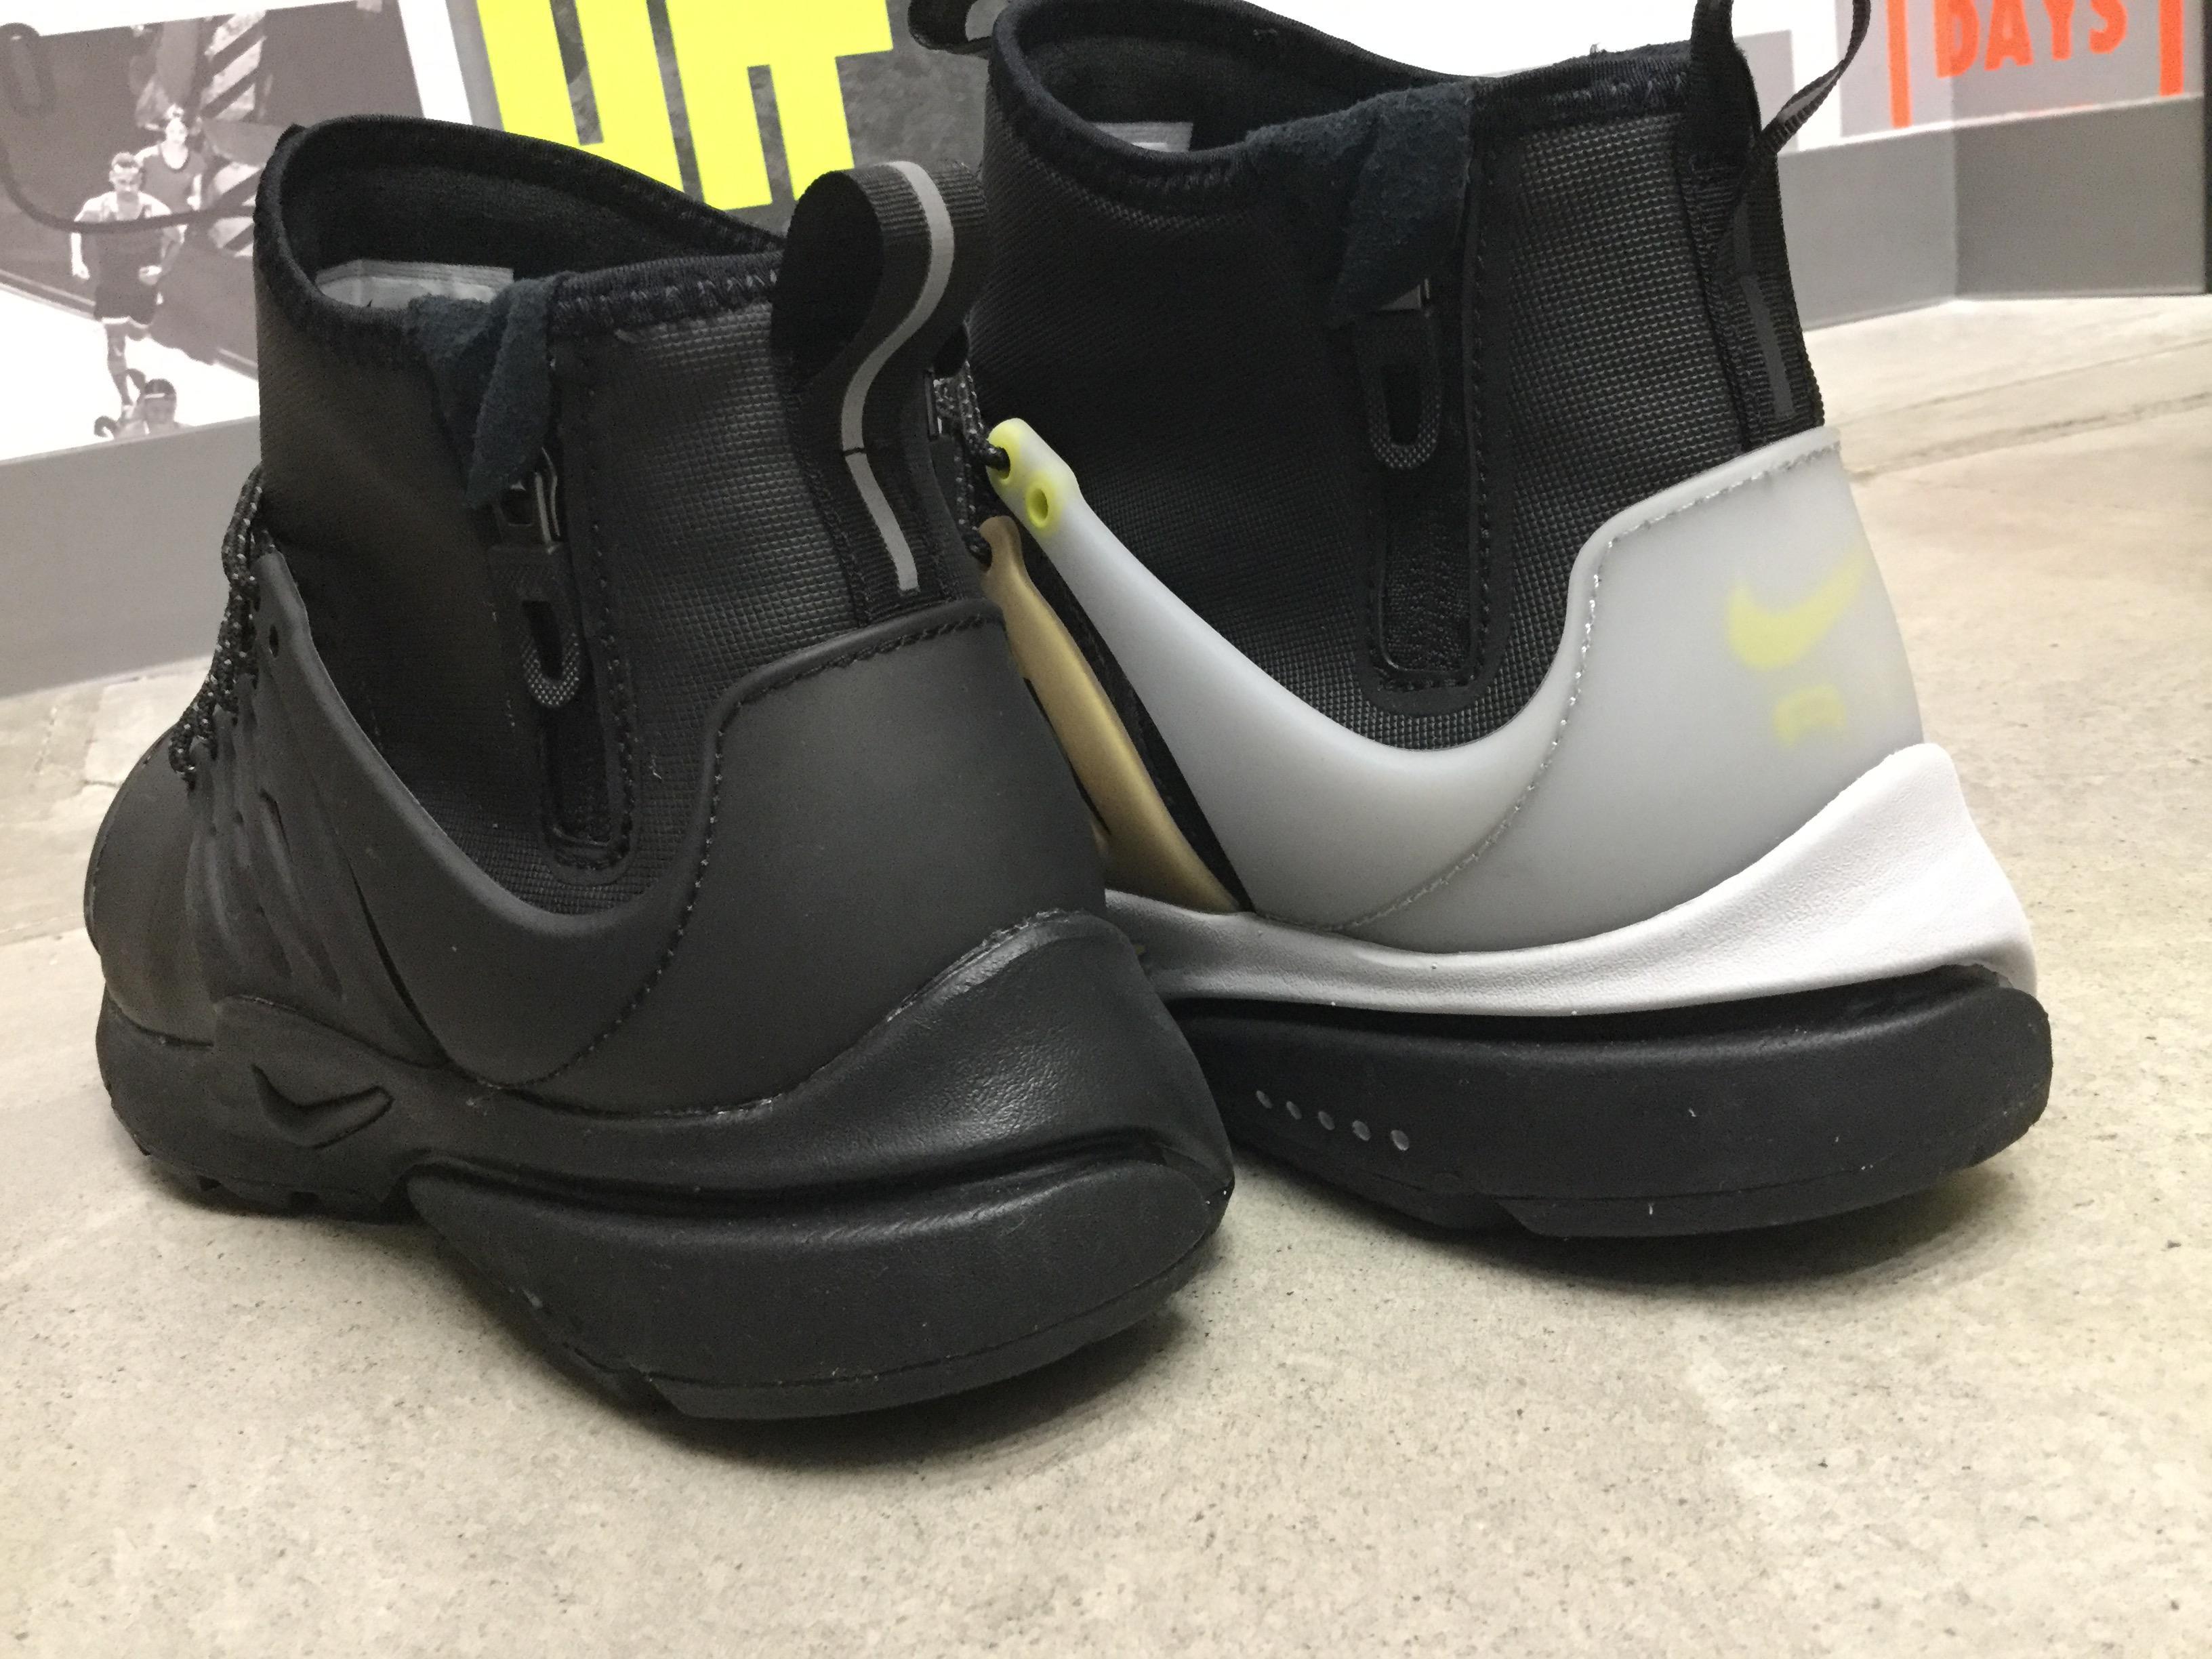 new nike sneaker boots